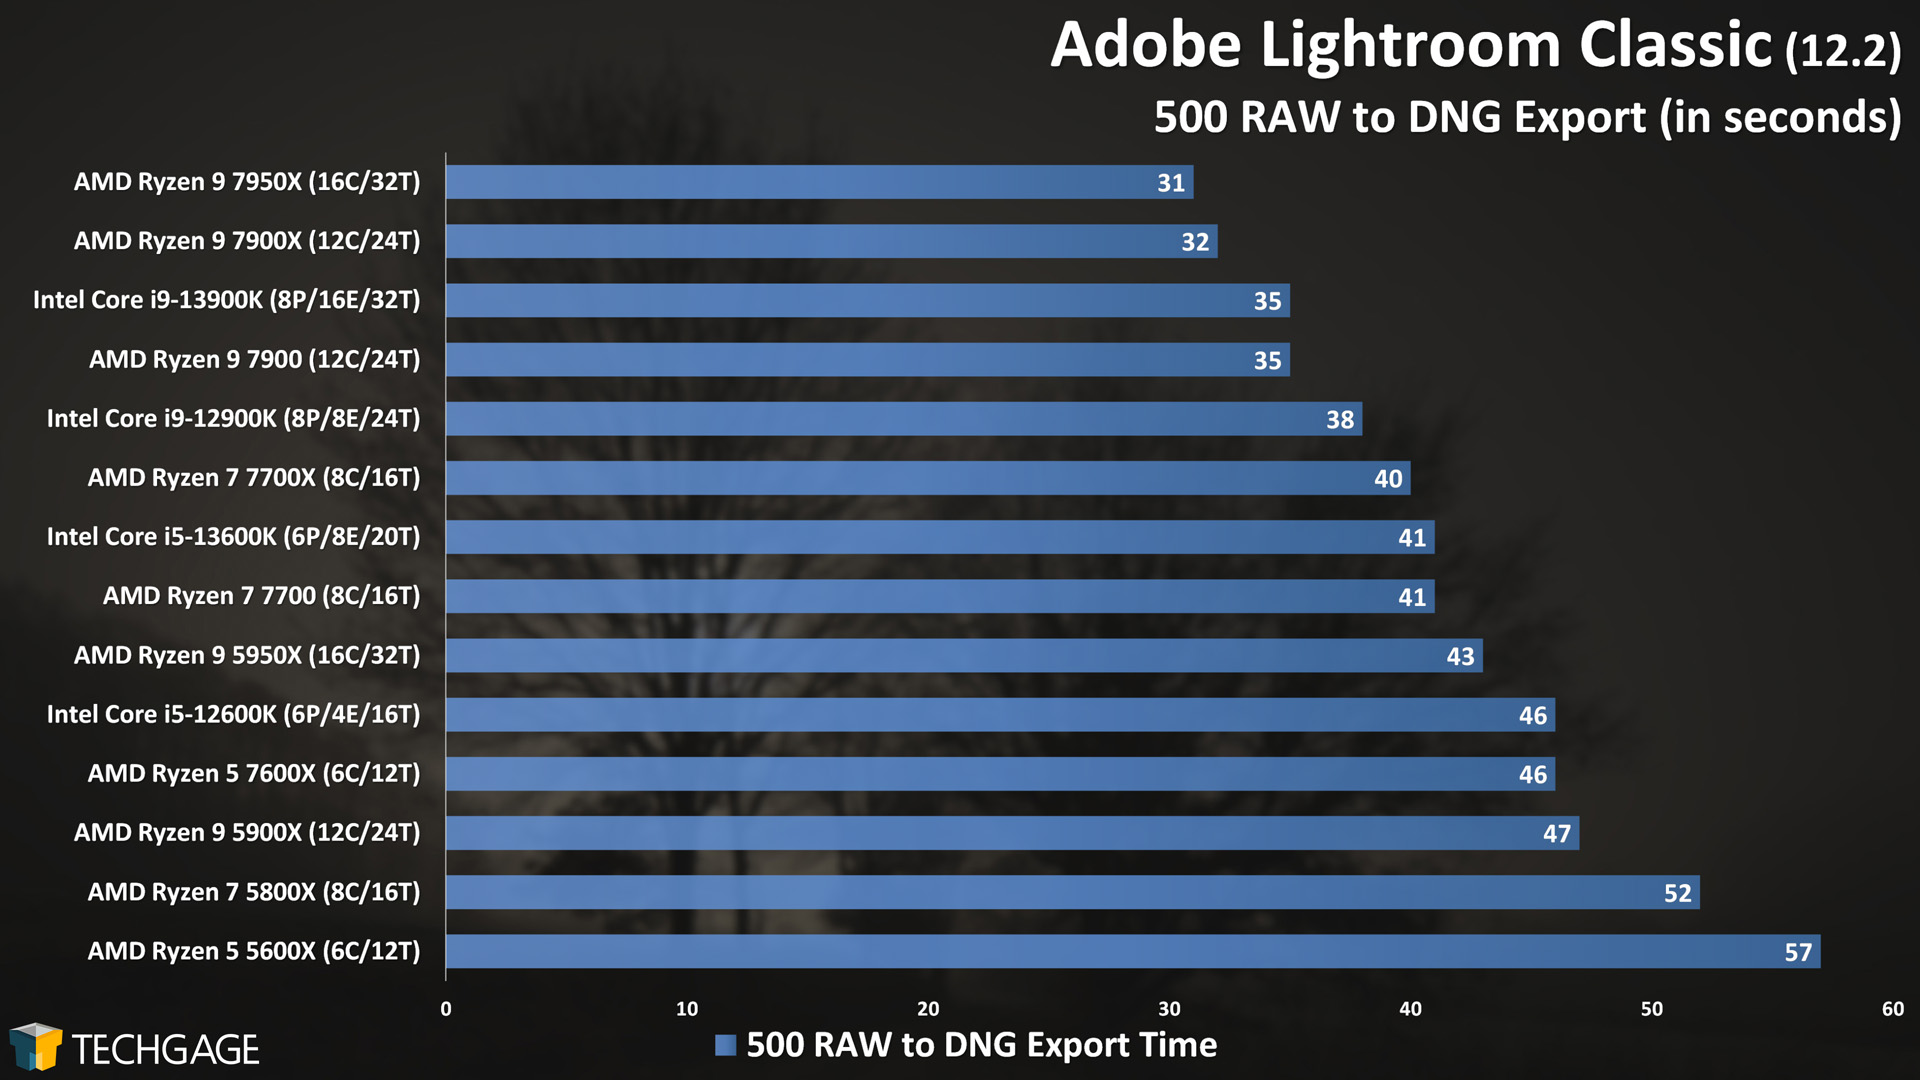 Adobe Lightroom Classic - CPU Export Performance (RAW to DNG)